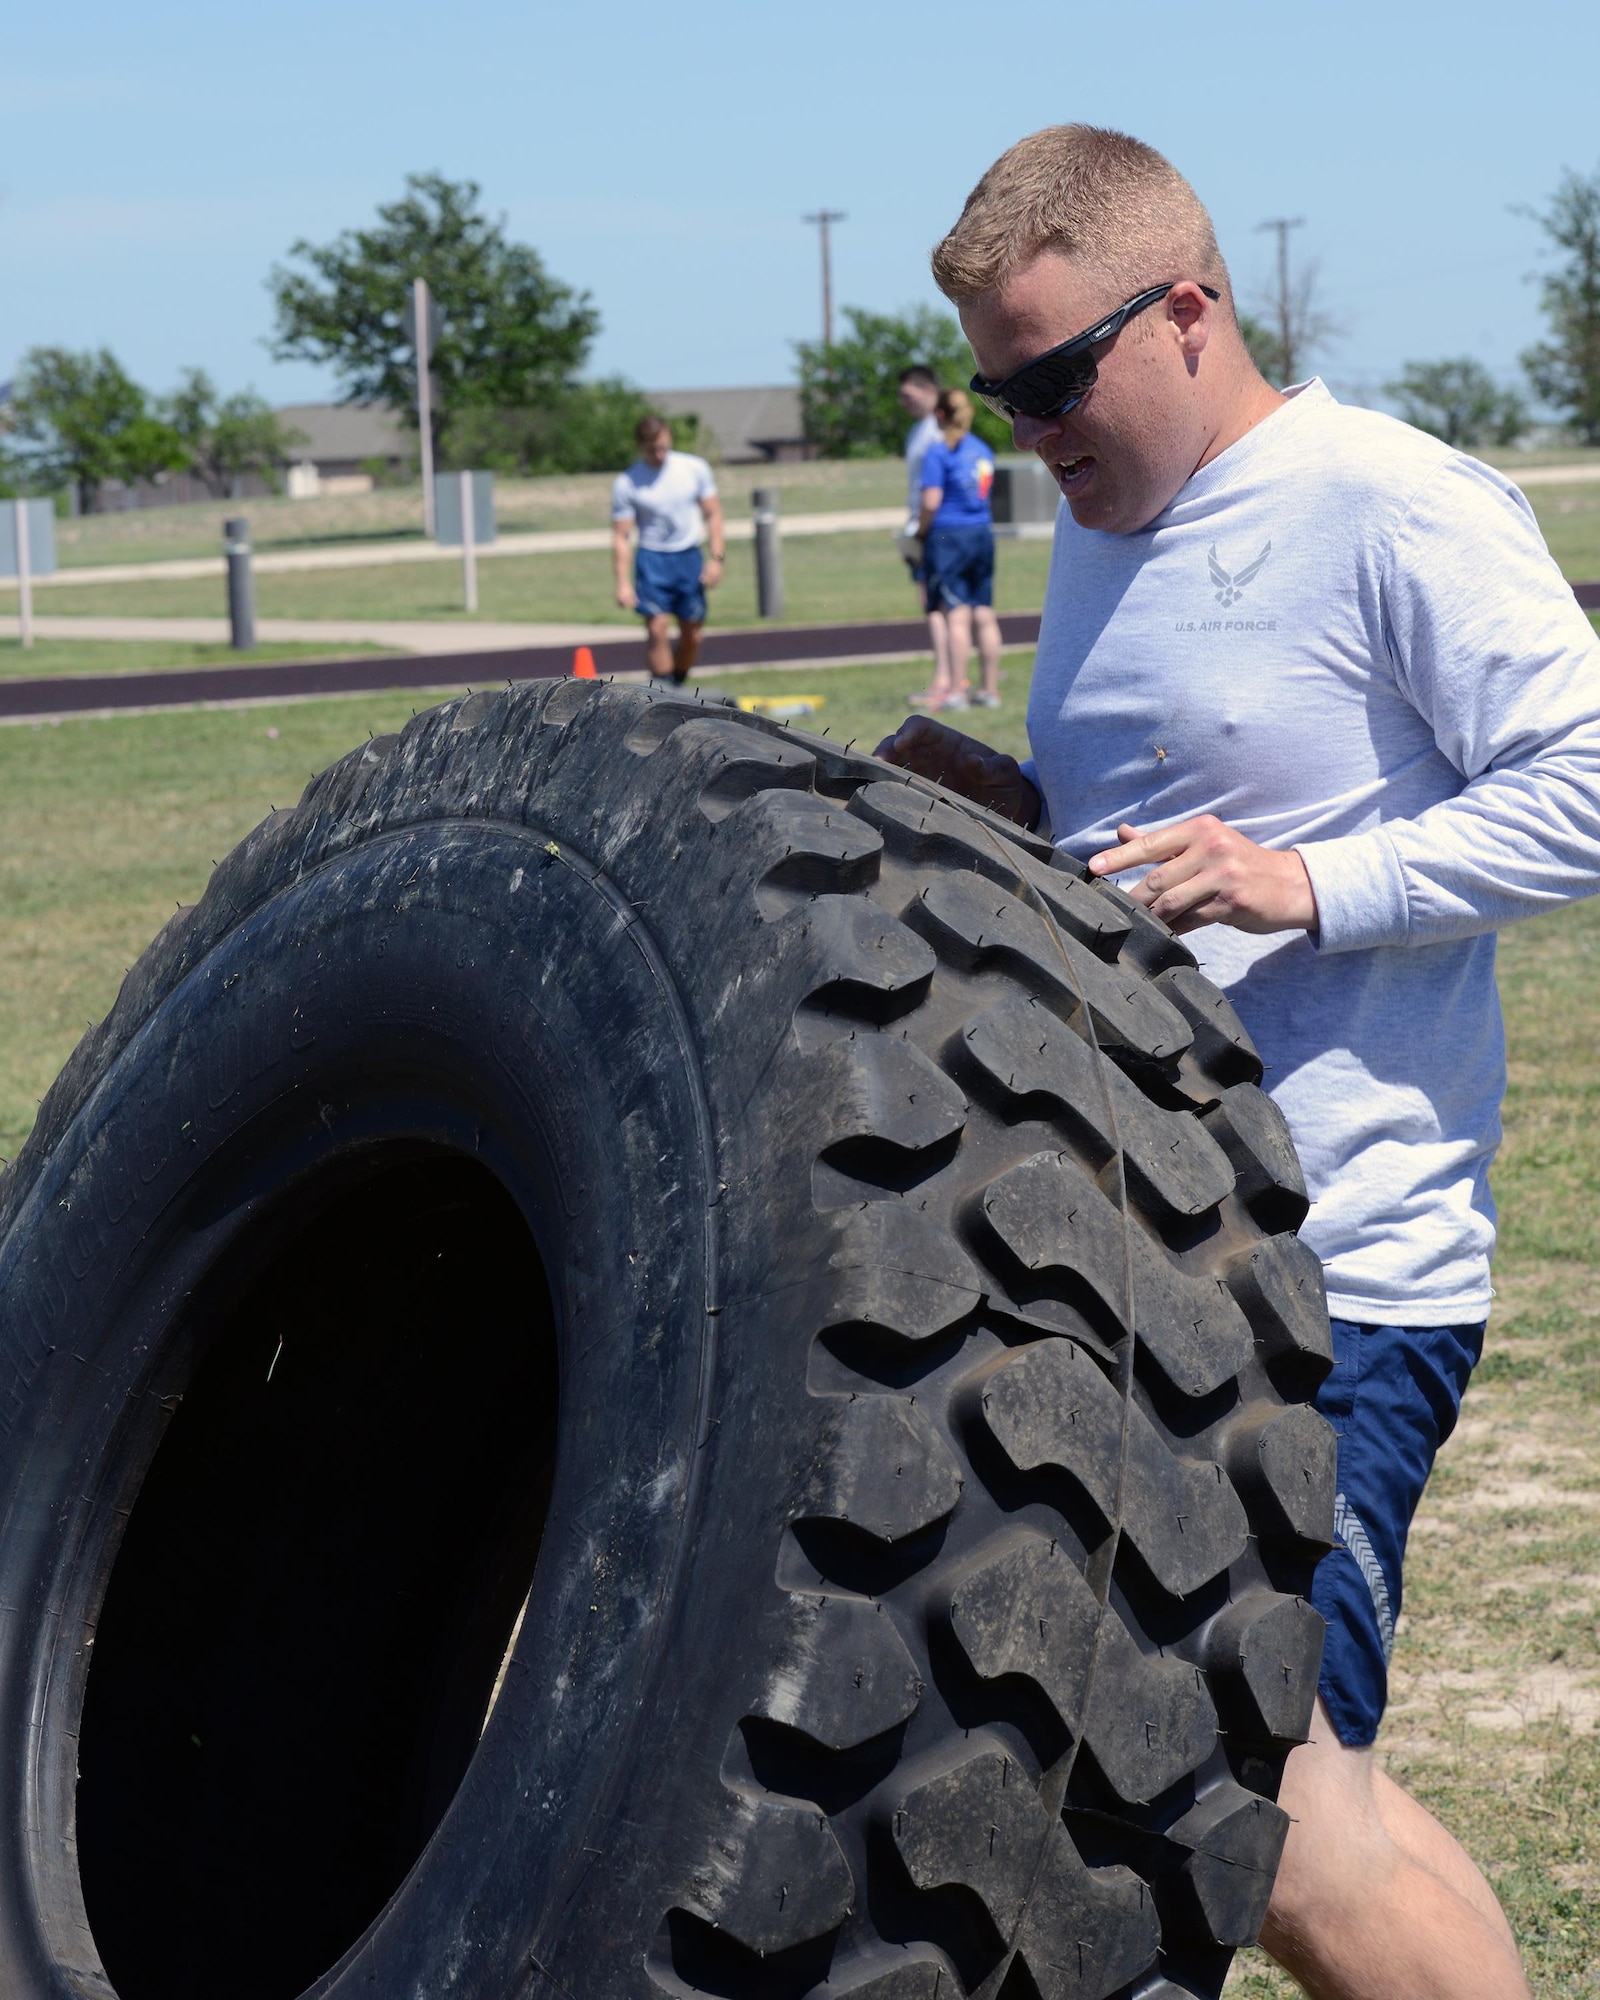 2nd Lt. Erik Mccullough, 47th Student Squadron awaiting pilot training, flips a 310-pound tire at Laughlin Air Force Base, Texas, April 5, 2016. The tire flip was the last event for the Warrior Games and tested the strength, endurance and team work of competitors. (U.S. Air Force photo by Senior Airman Jimmie D. Pike)